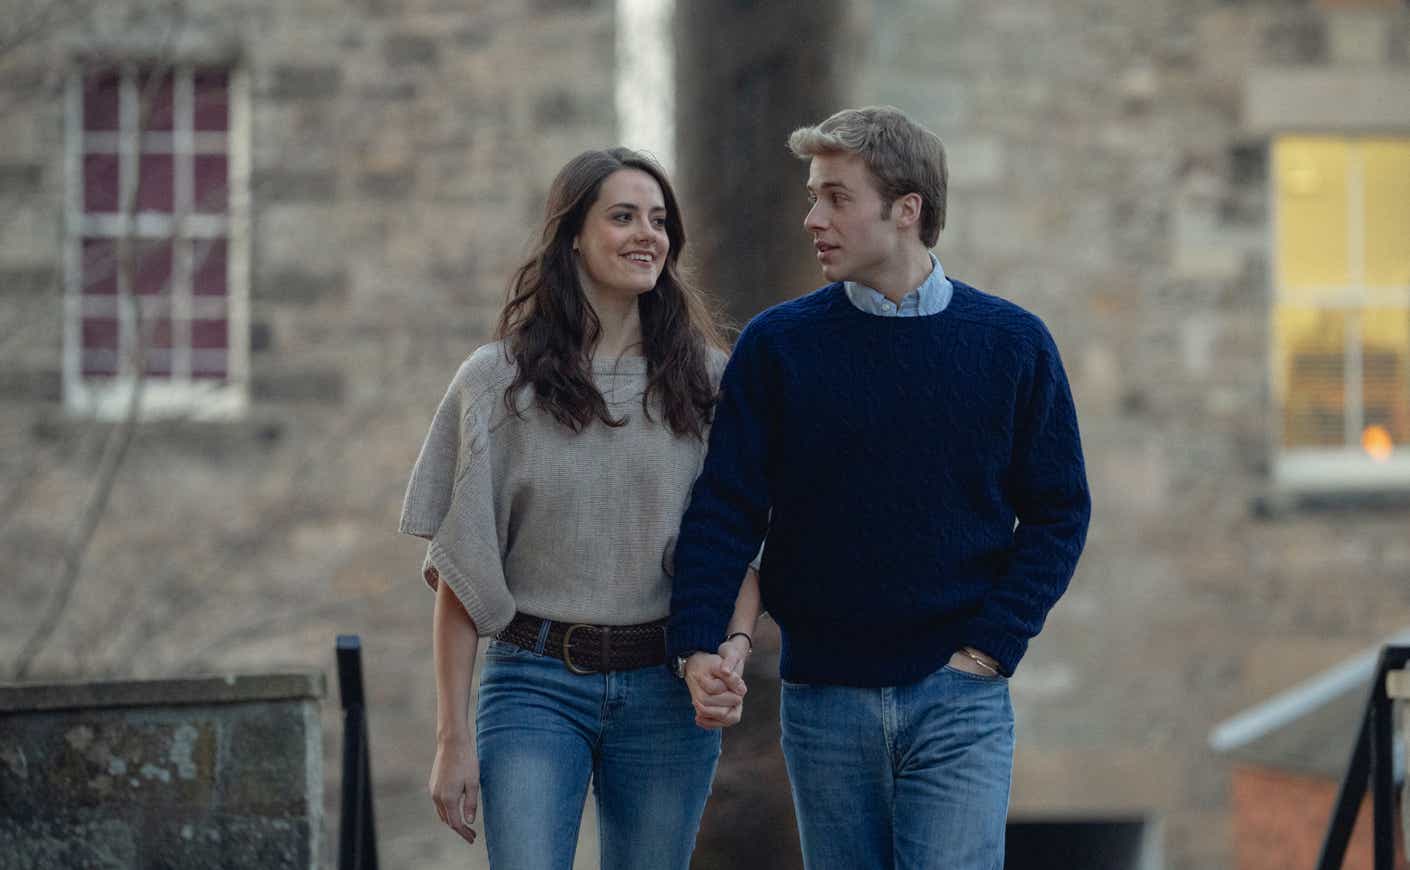 Prince William and Kate Middleton in The Crown